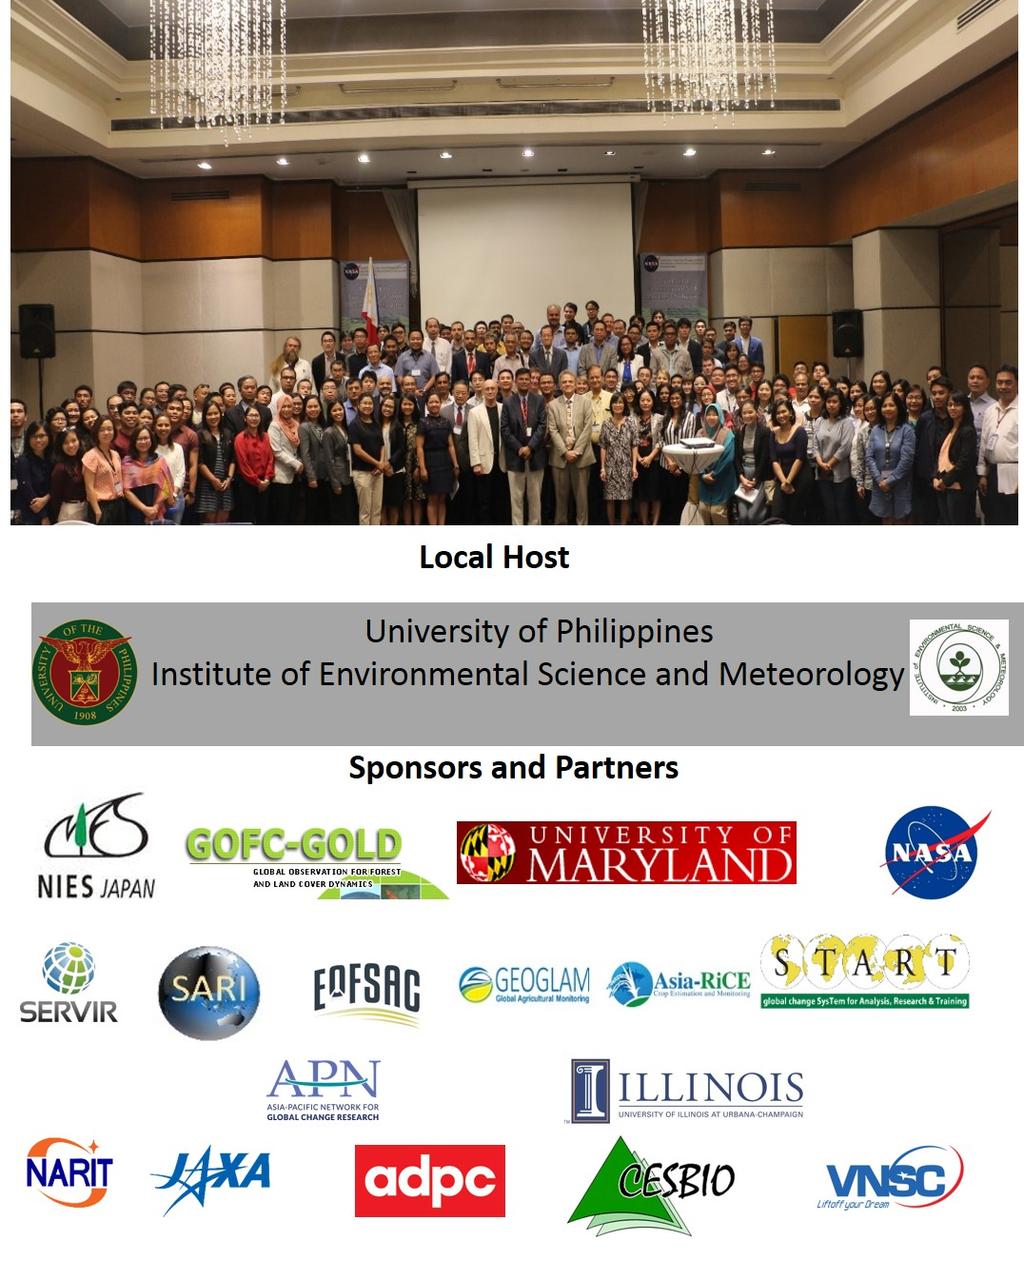 Quezon city, Philippines 28-30 th May, 2018 200-participants 3-day meeting with sessions on LCLUC, Agriculture and Land- Atmopsheric